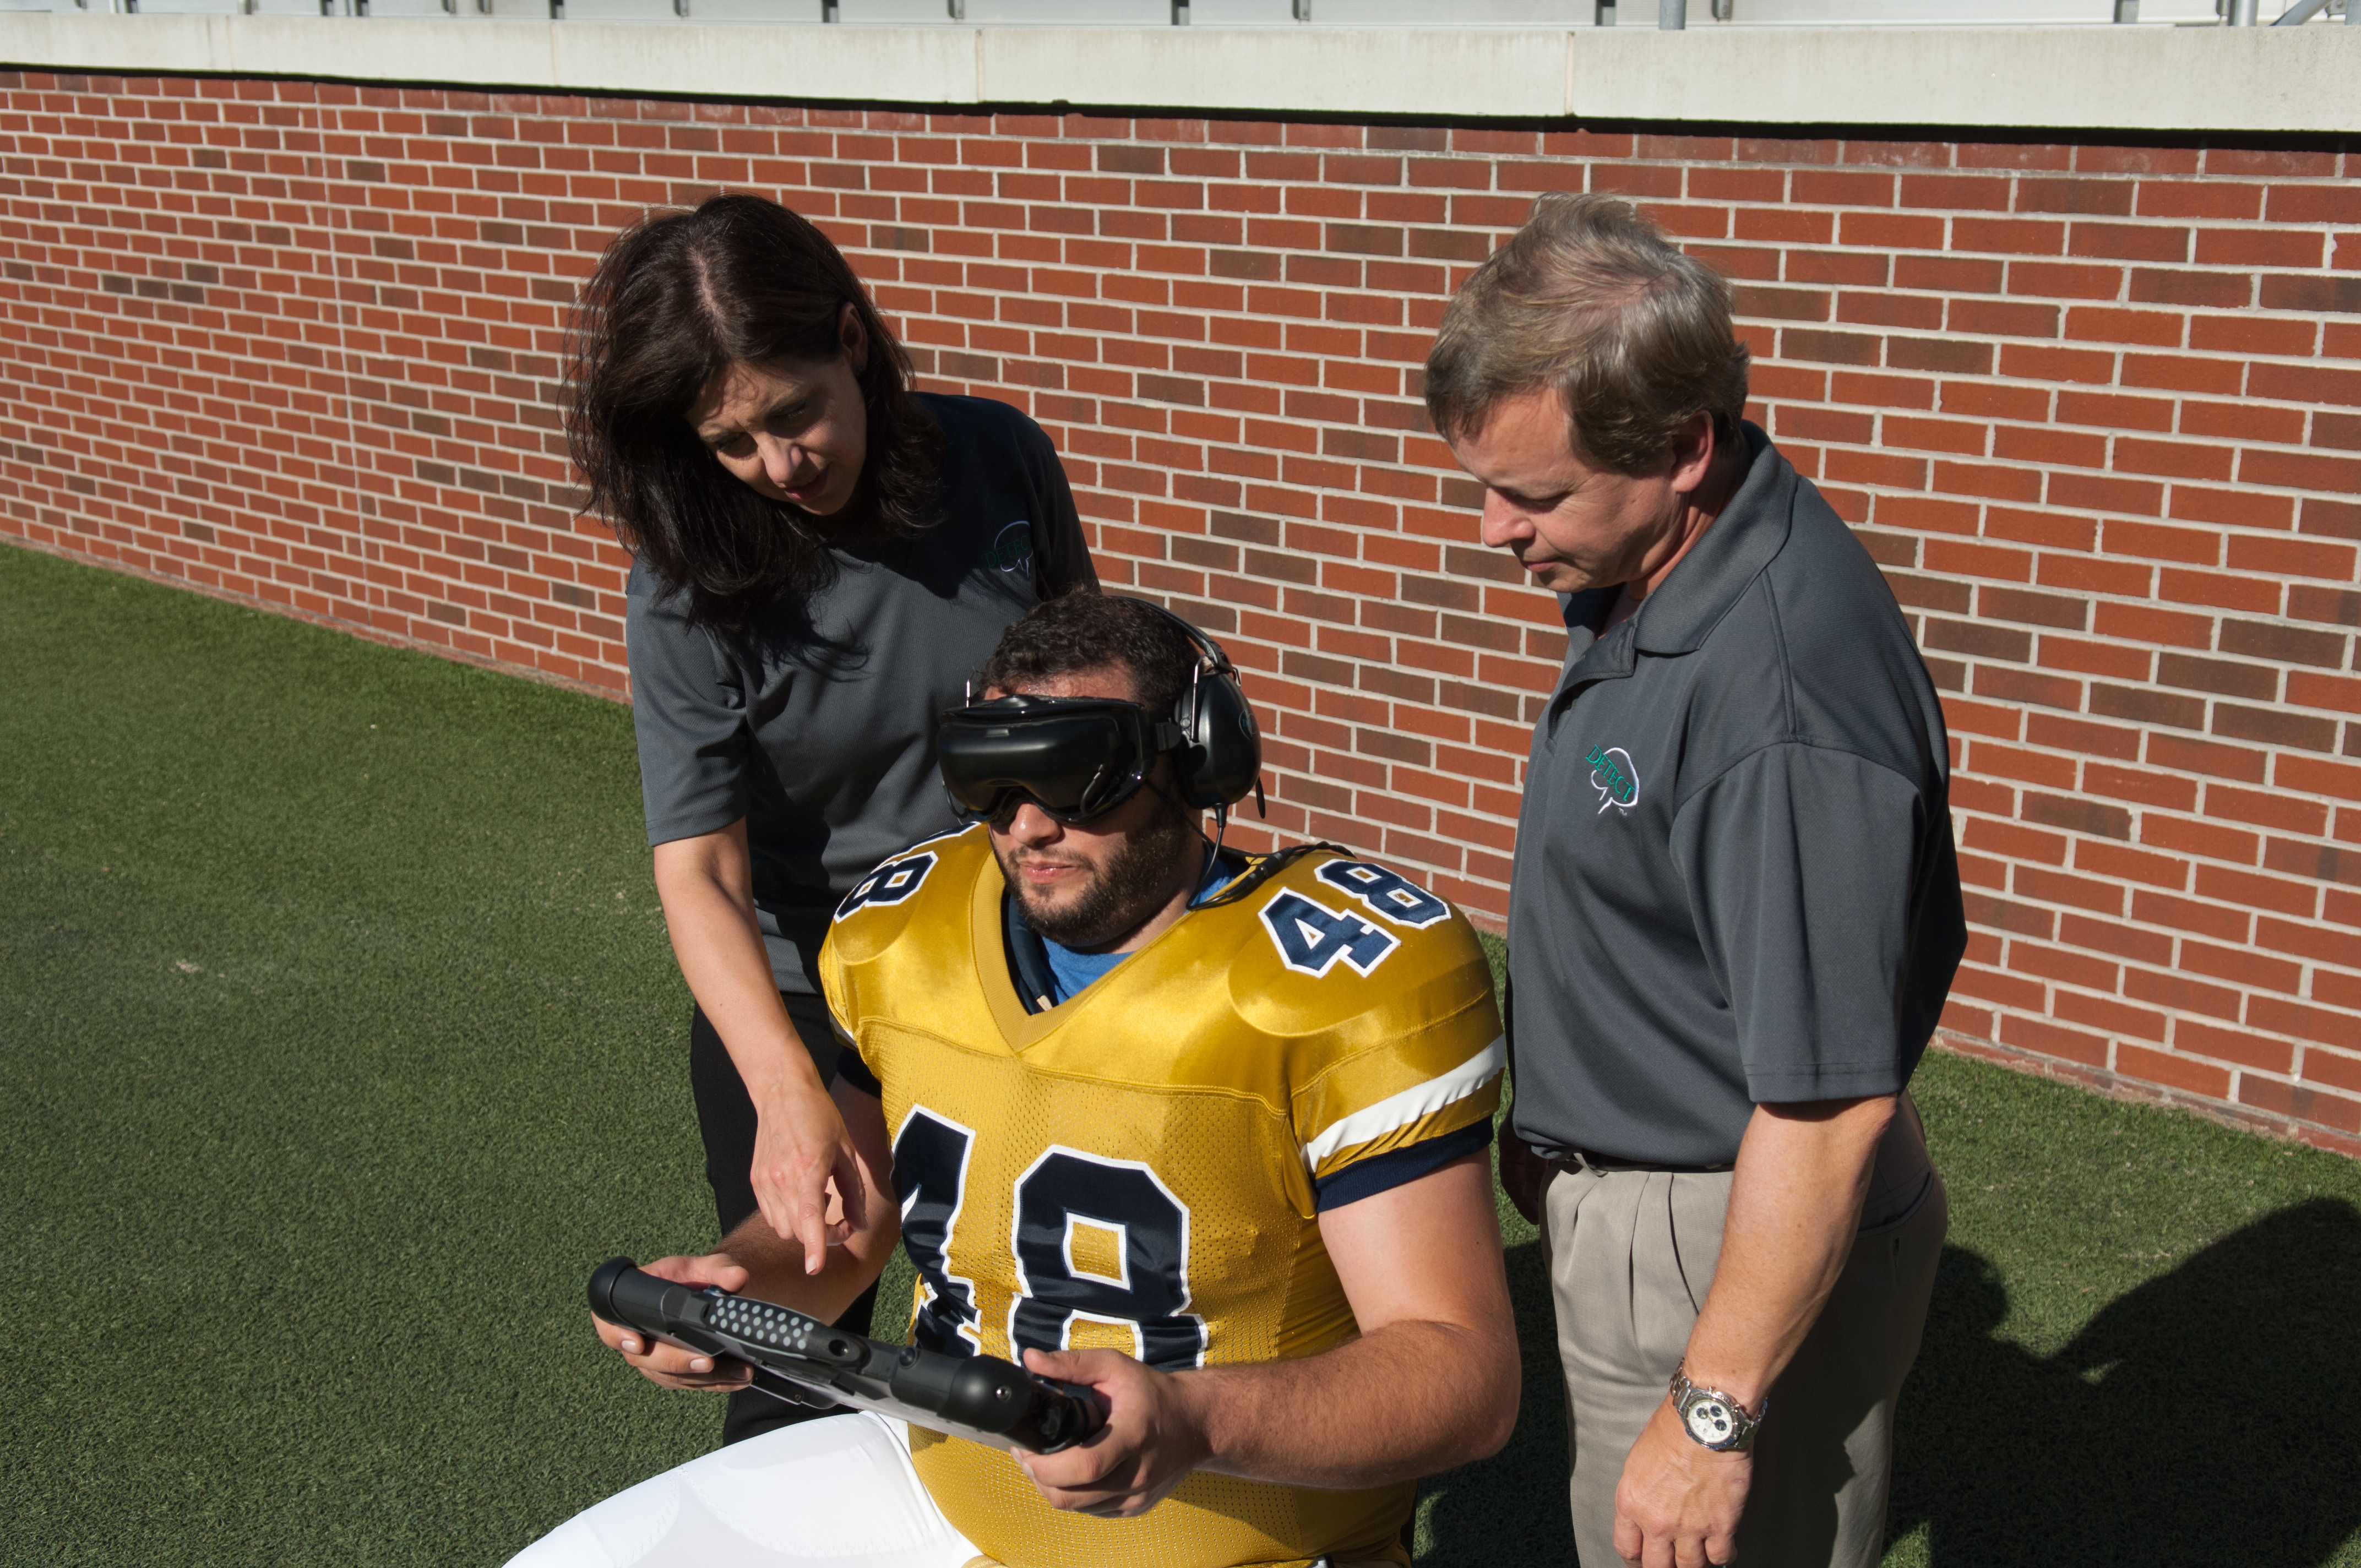 Georgia Tech's Michelle LaPlaca and Emory University's David Wright are part of the team that developed iDETECT, a system designed to improve neurologic assessment following mild traumatic brain injury, such as concussion sustained in athletic events and military conflict.